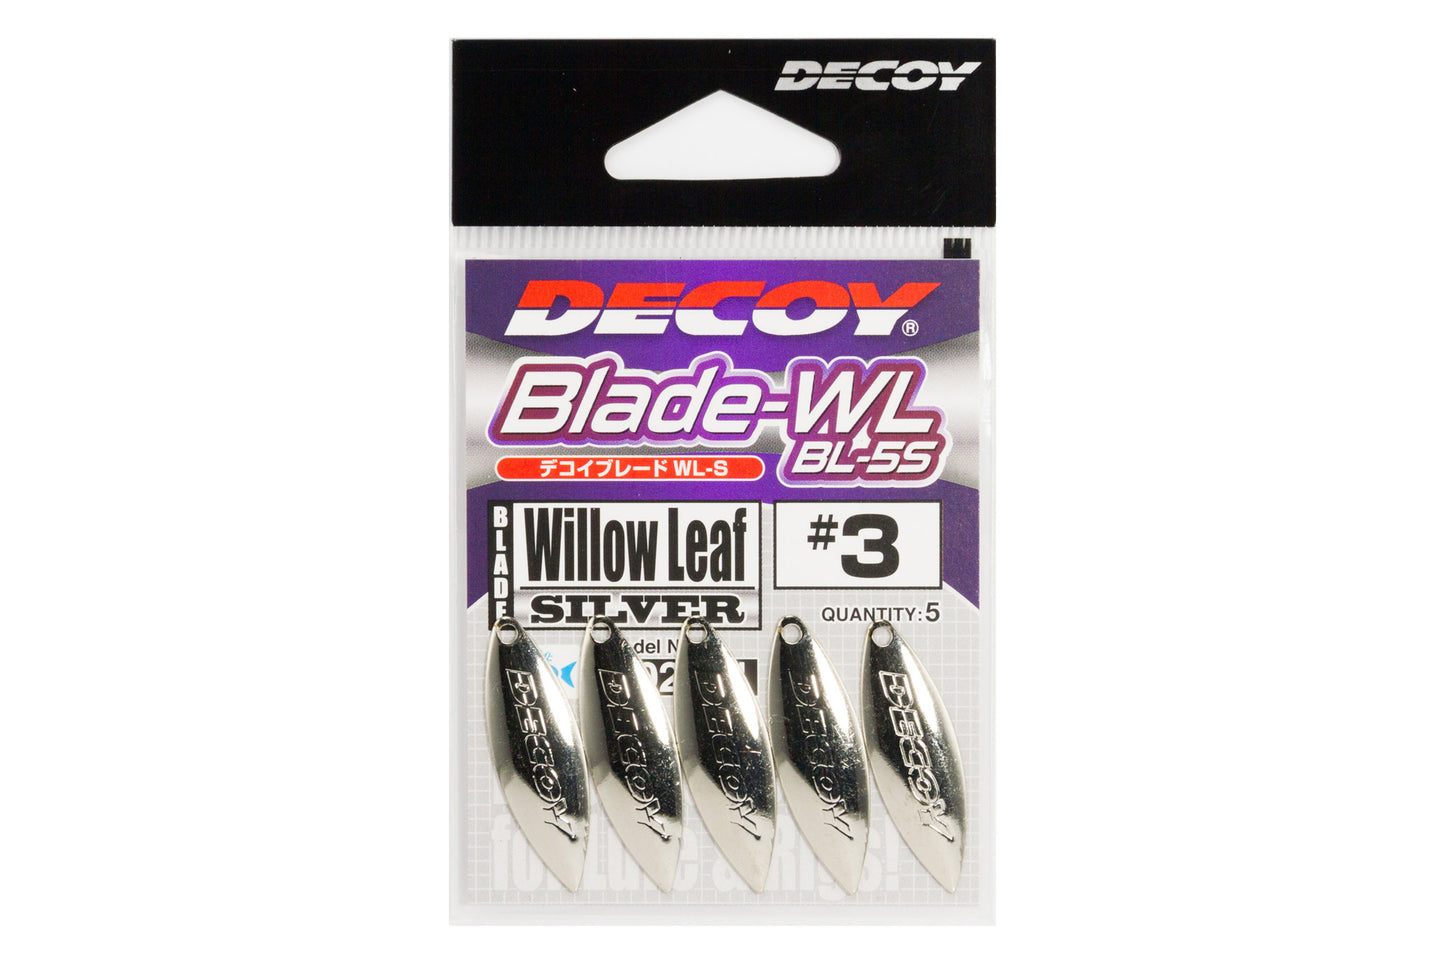 BL-5S Willow Leaf Silver